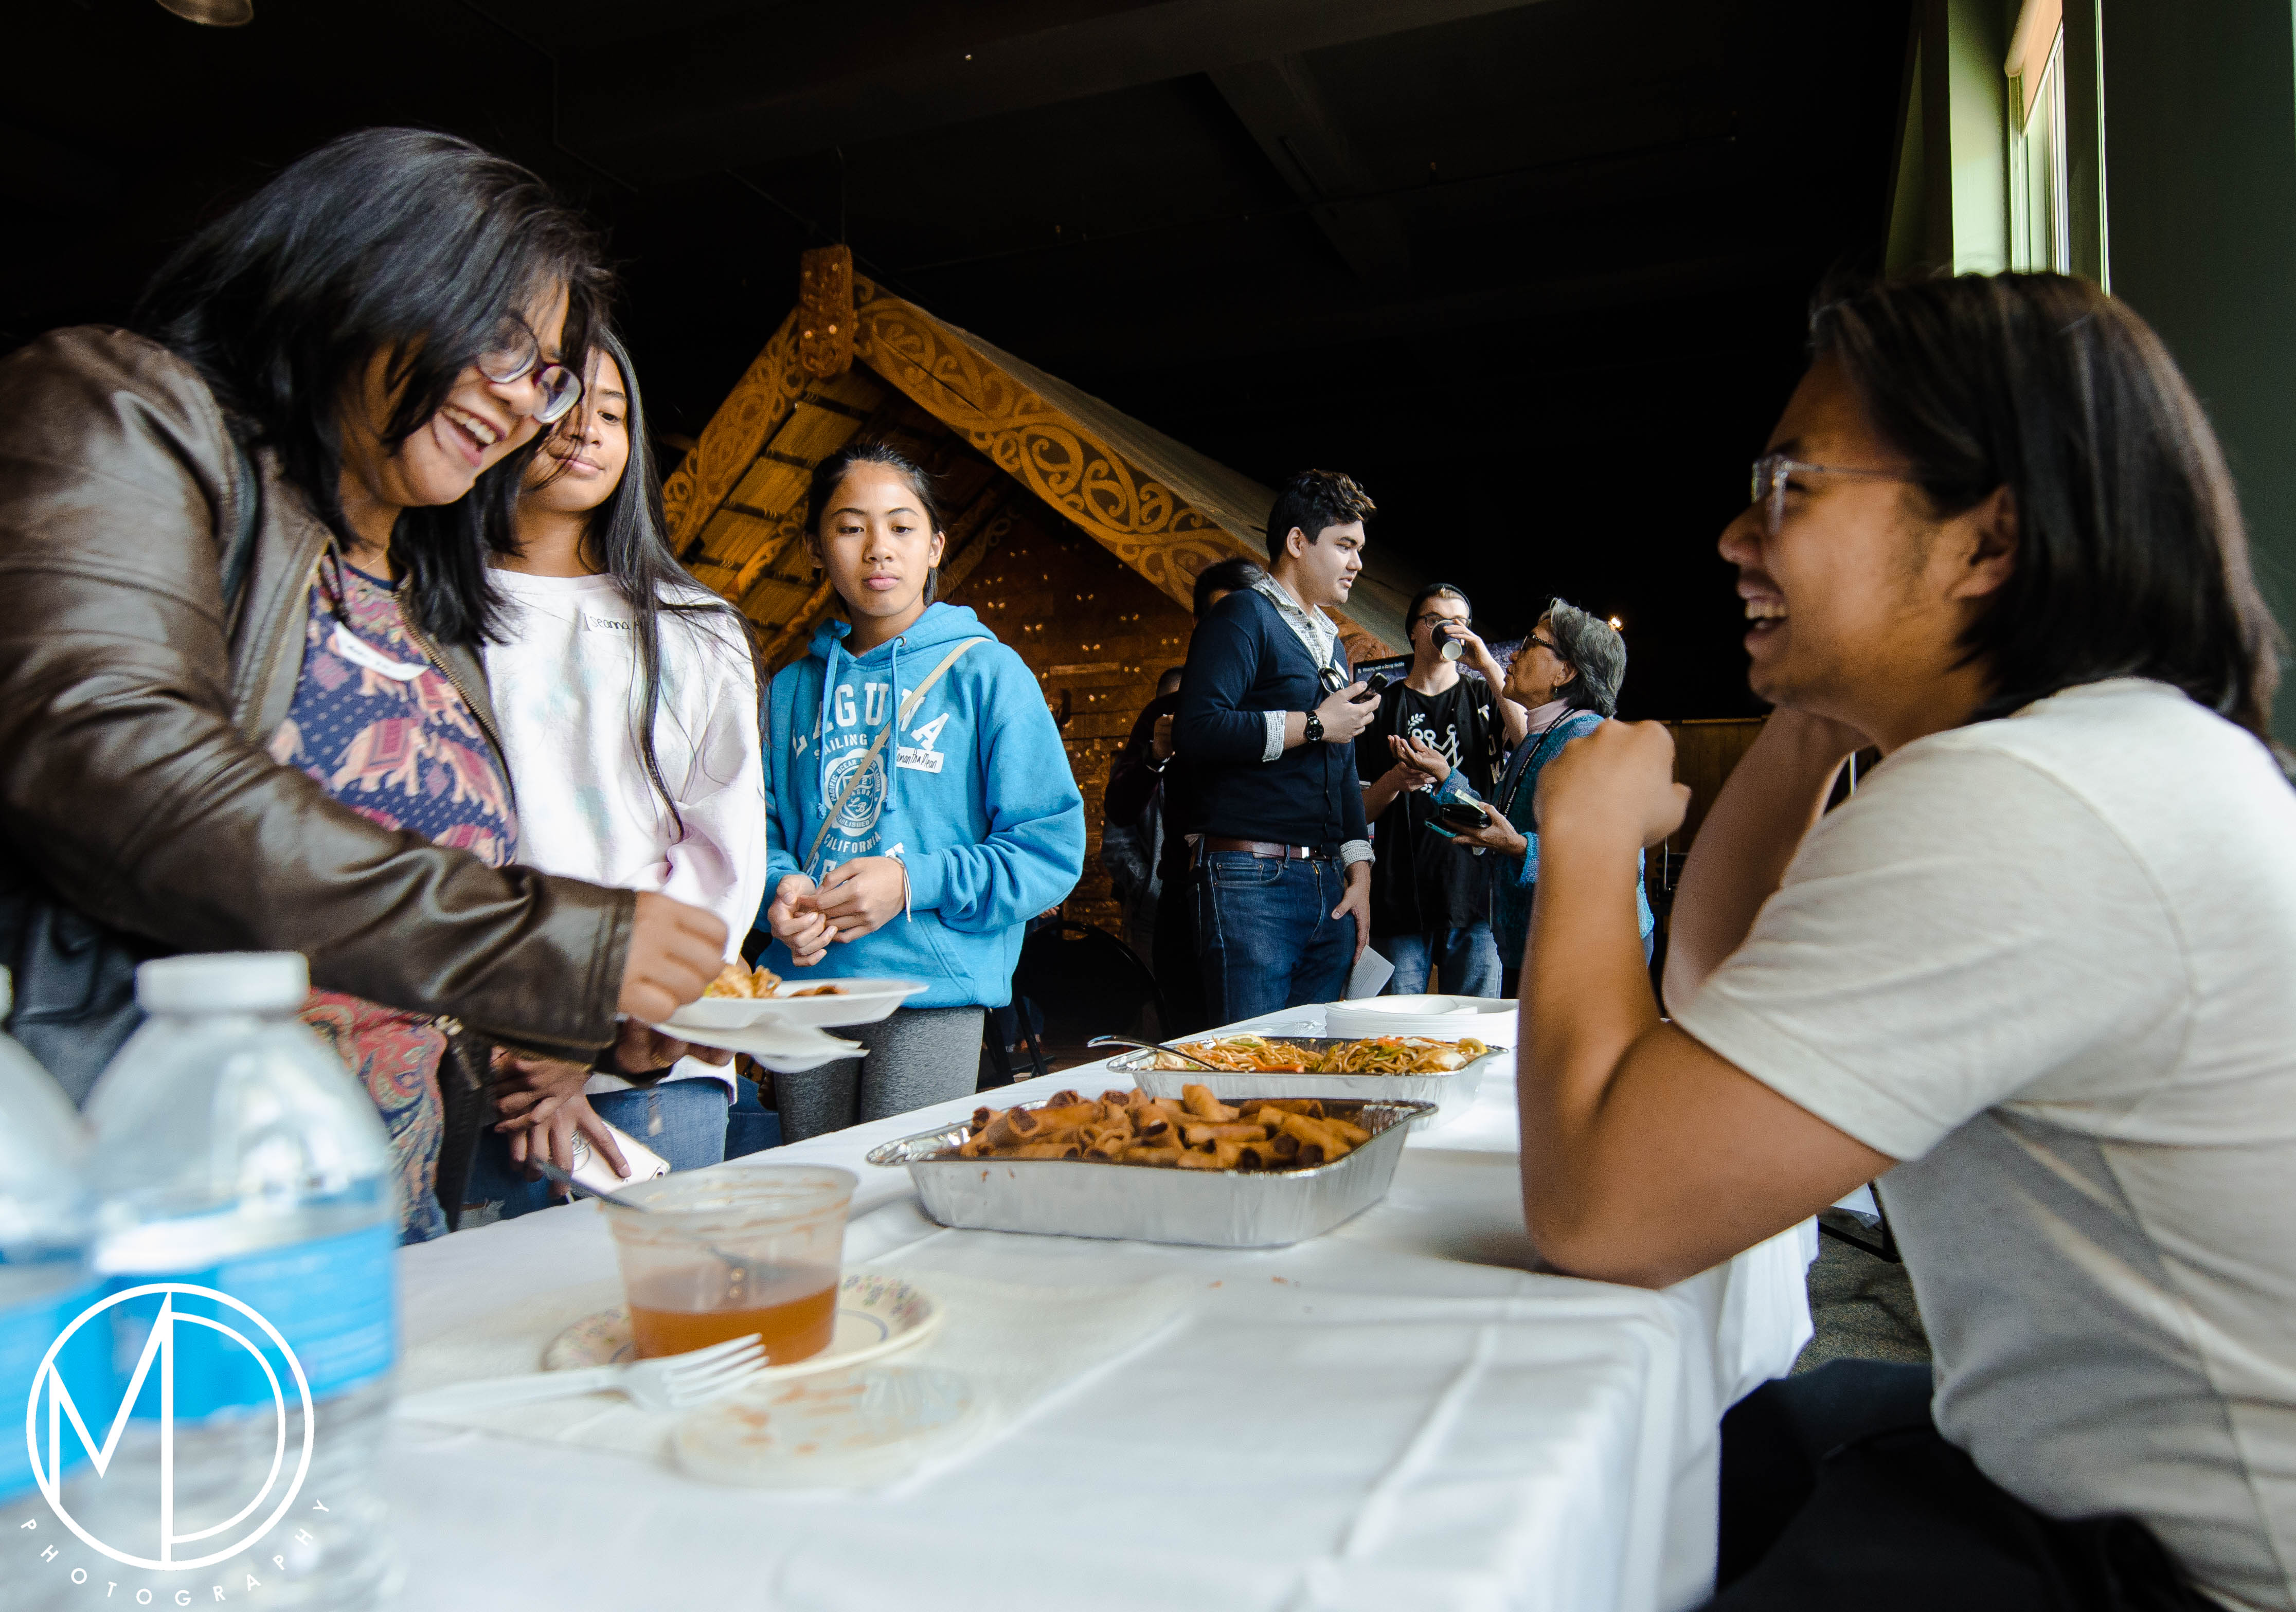 Tristan Espinoza interacting with guests by the food table. (c) Field Museum of Natural History - CC BY-NC 4.0